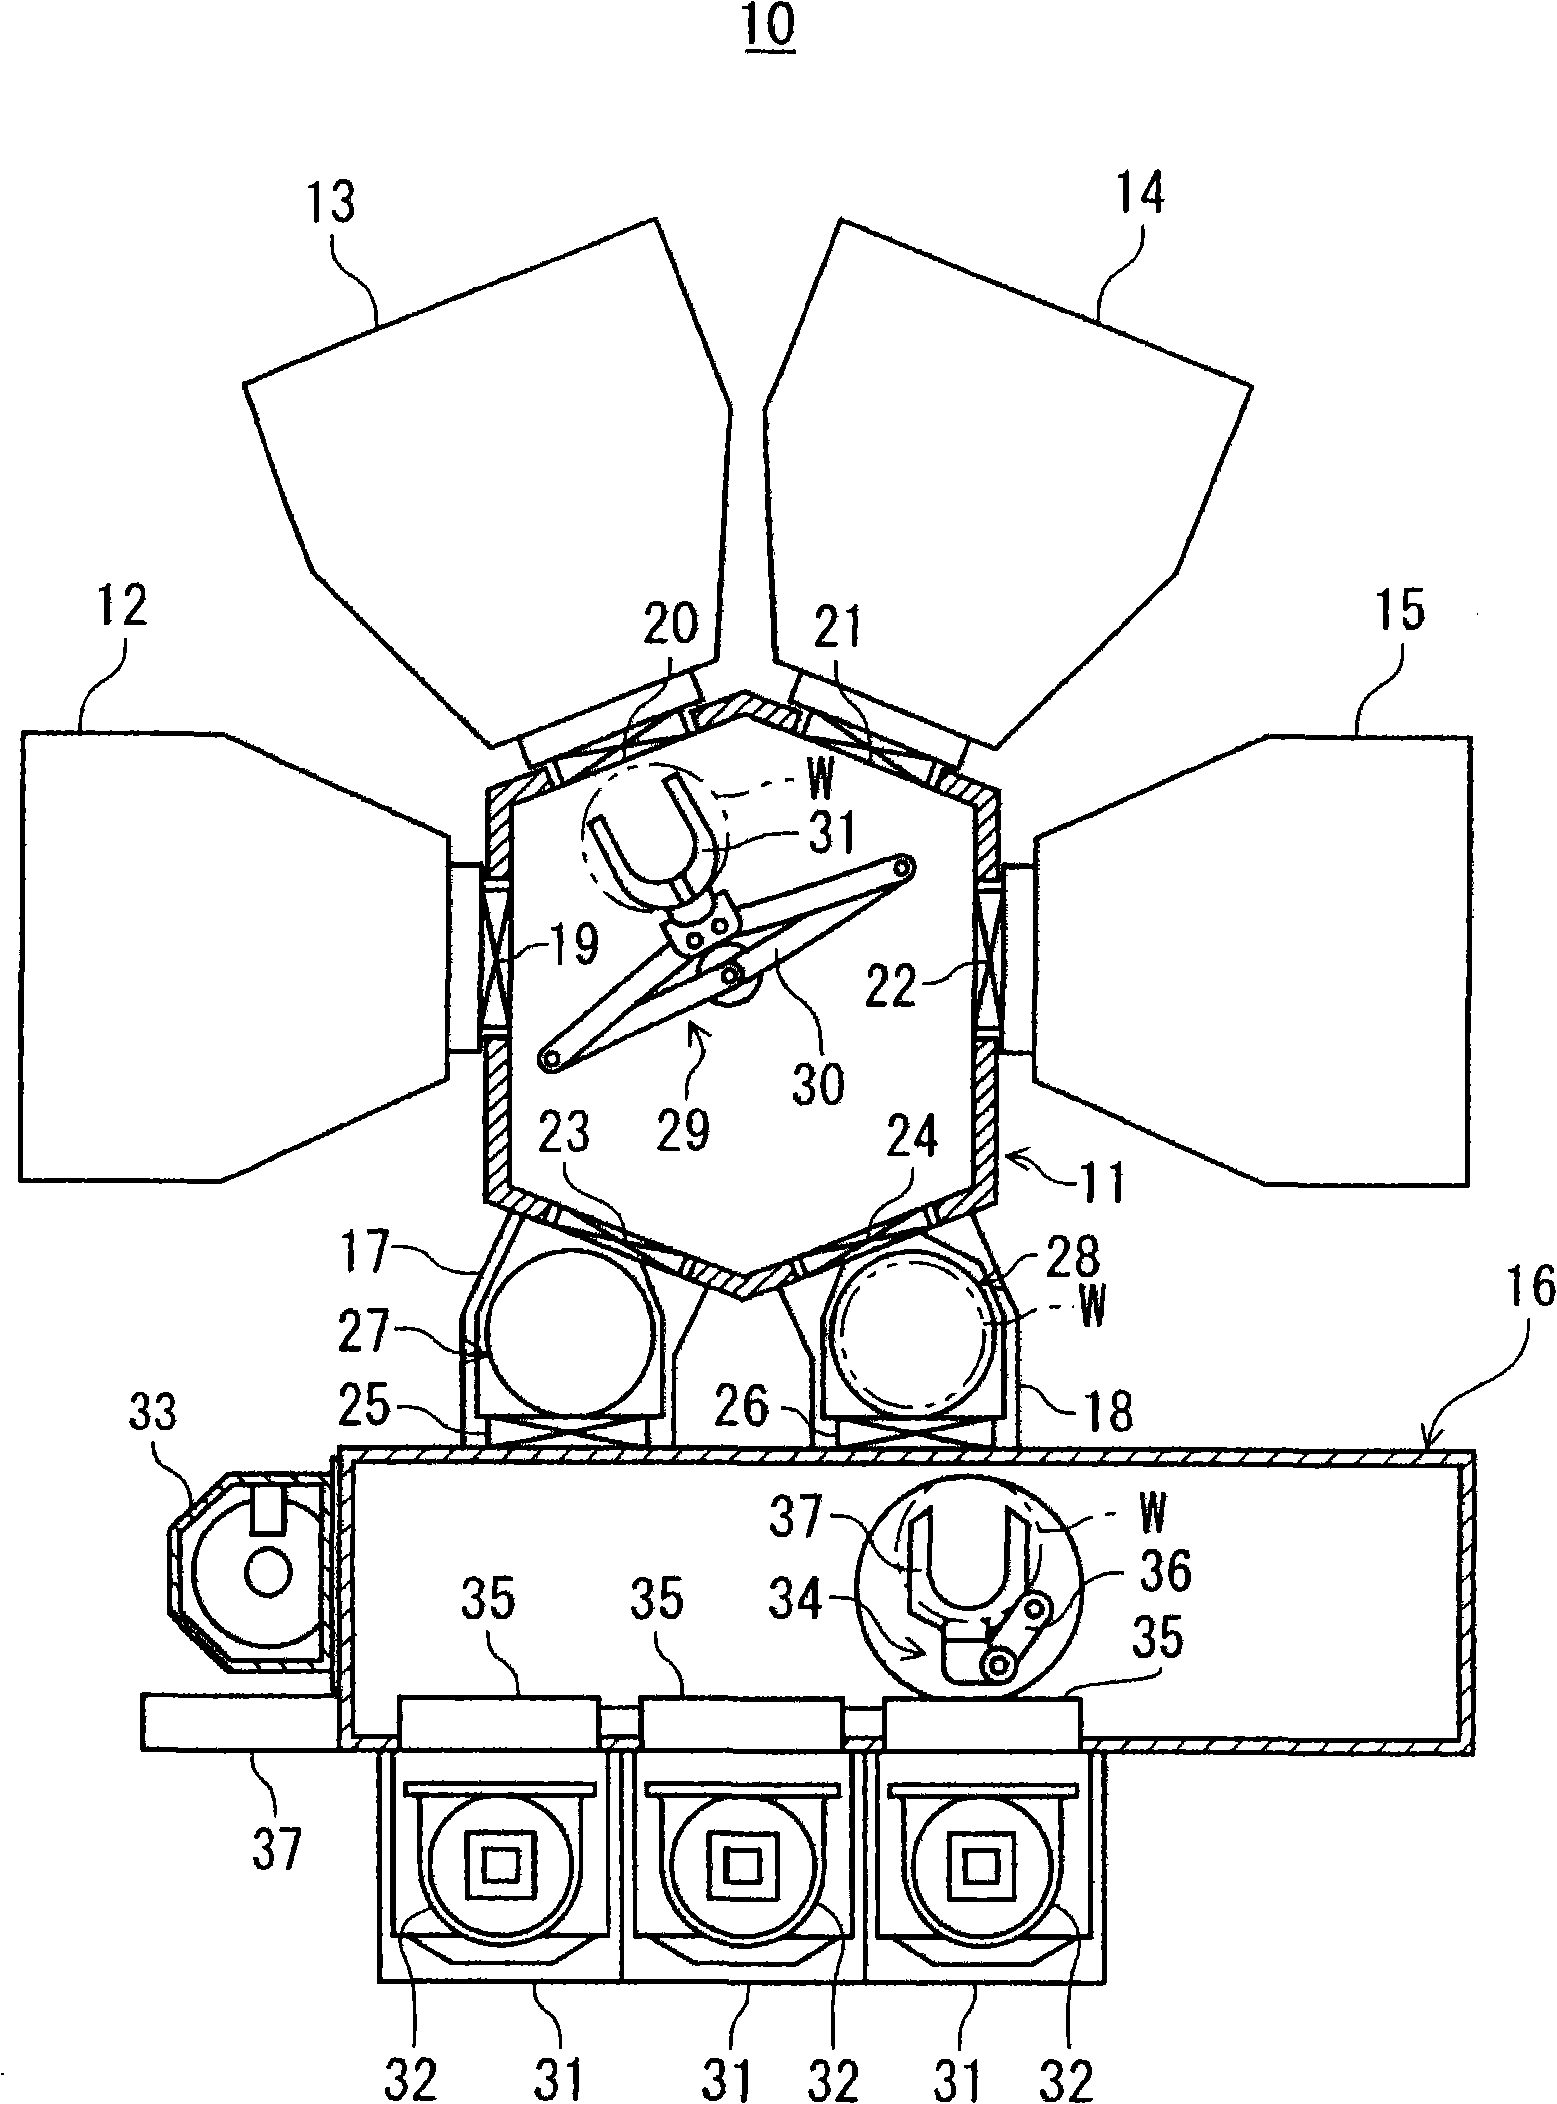 Substrate processing system and substrate cleaning apparatus